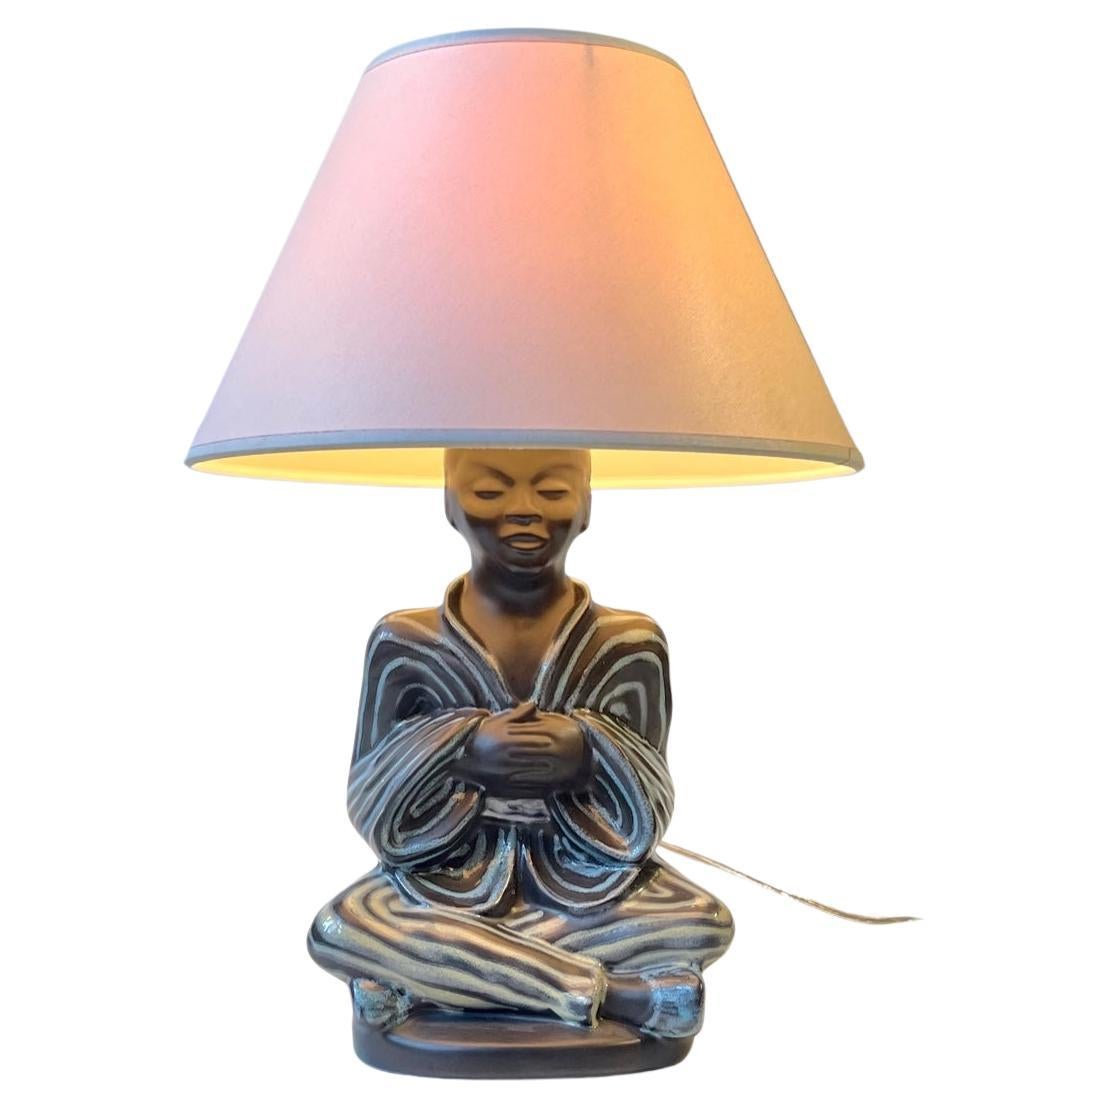 Vintage Black Buddha Table Lamp with Pastel Glazes by Søholm, Danish 1960s For Sale